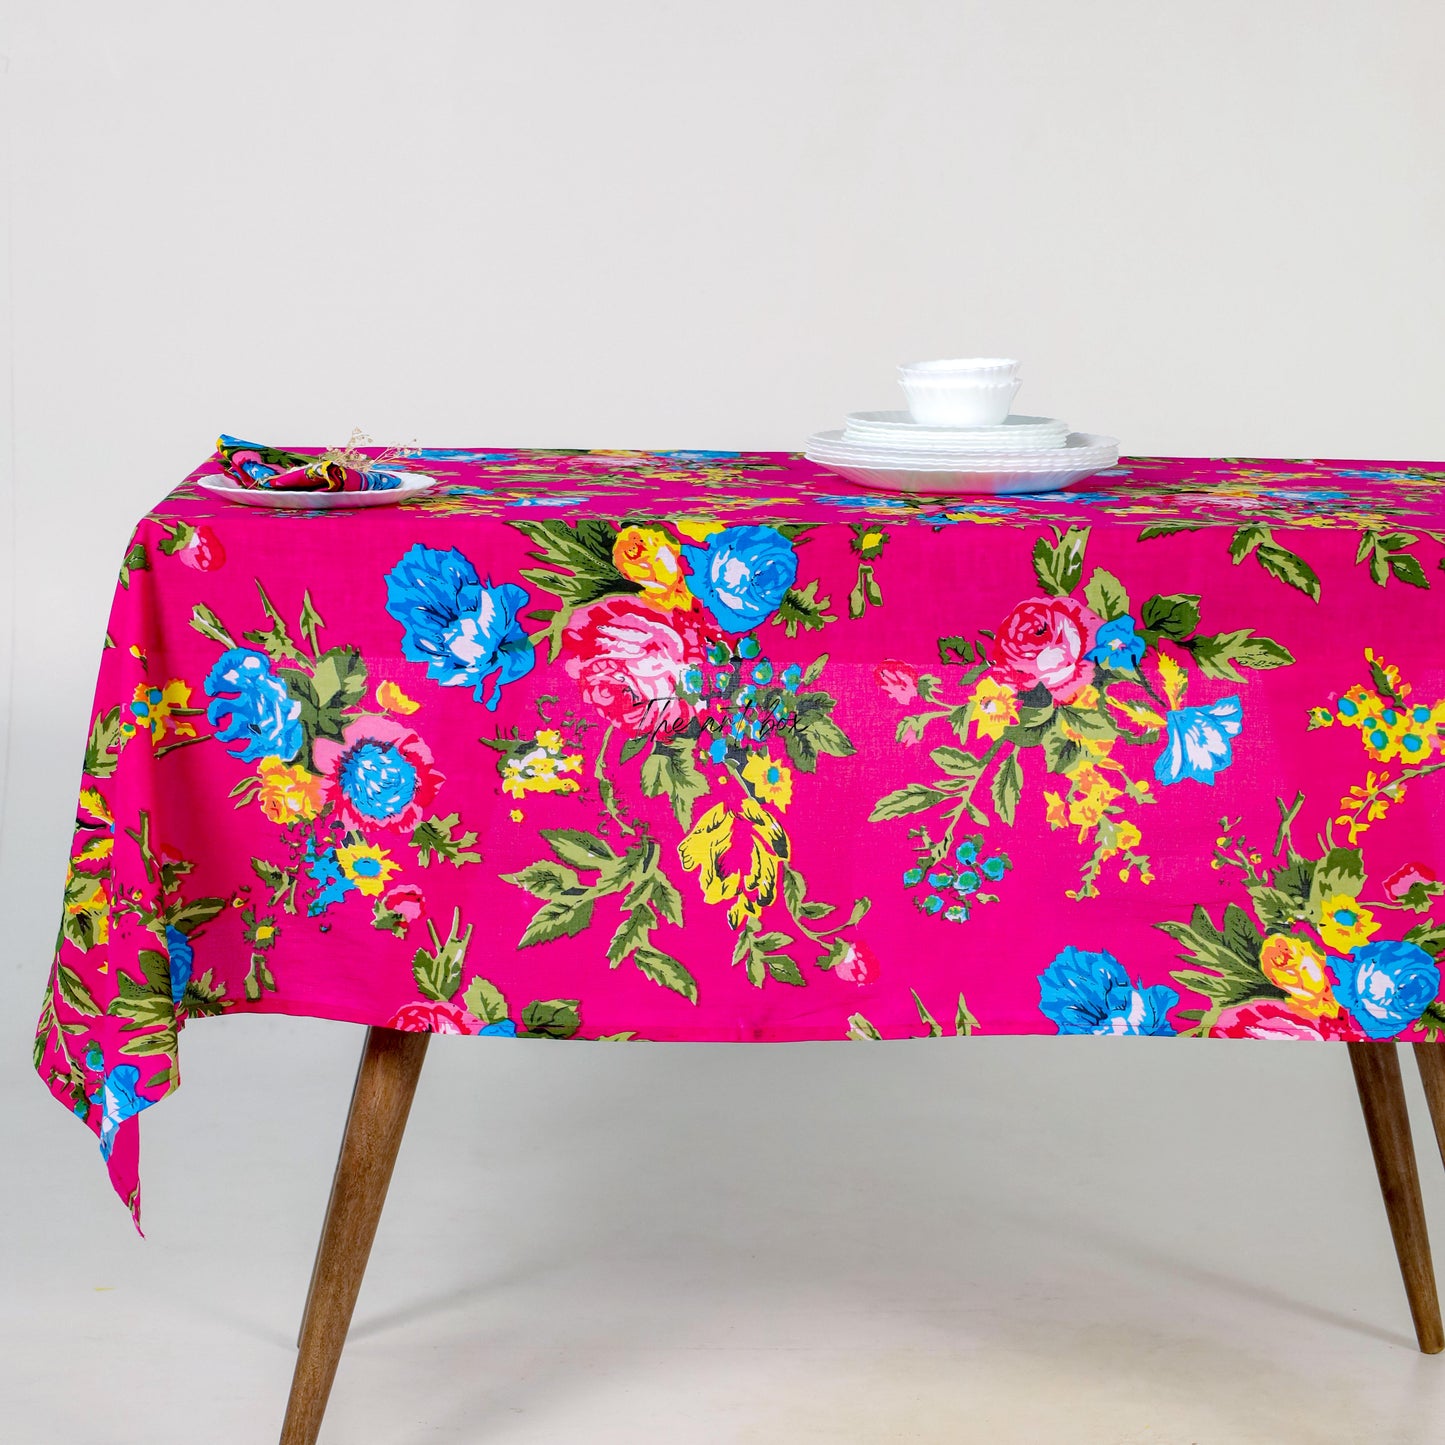 New Red Printed Table Cloth, Red Floral Printed Cotton Table Cover